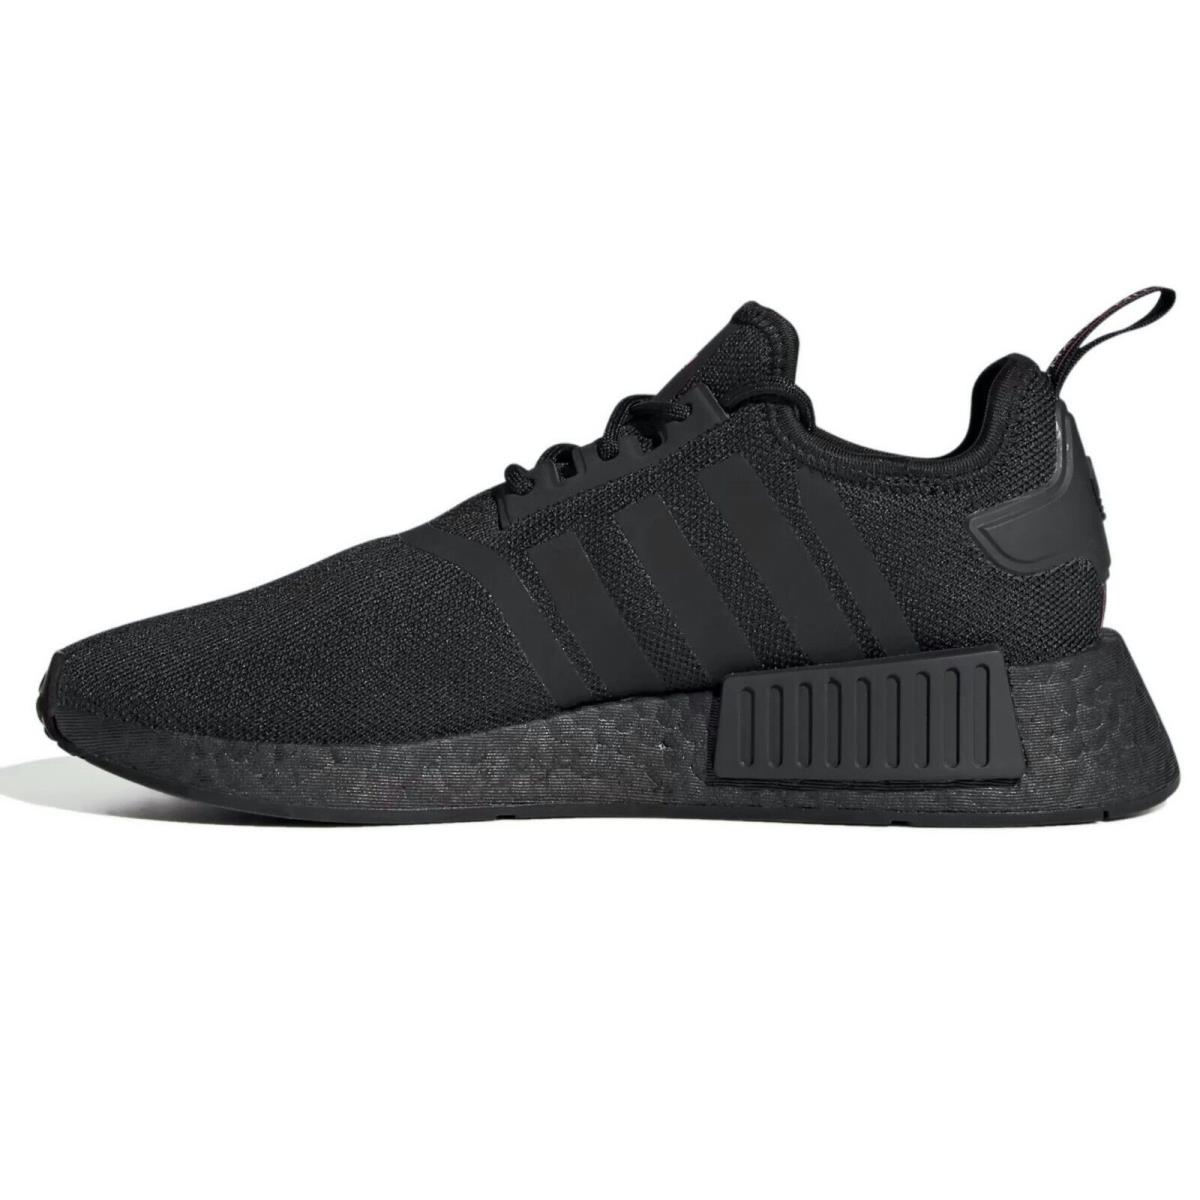 Adidas Originals Nmd R1 Women s Sneakers Casual Shoes Sport Running Black